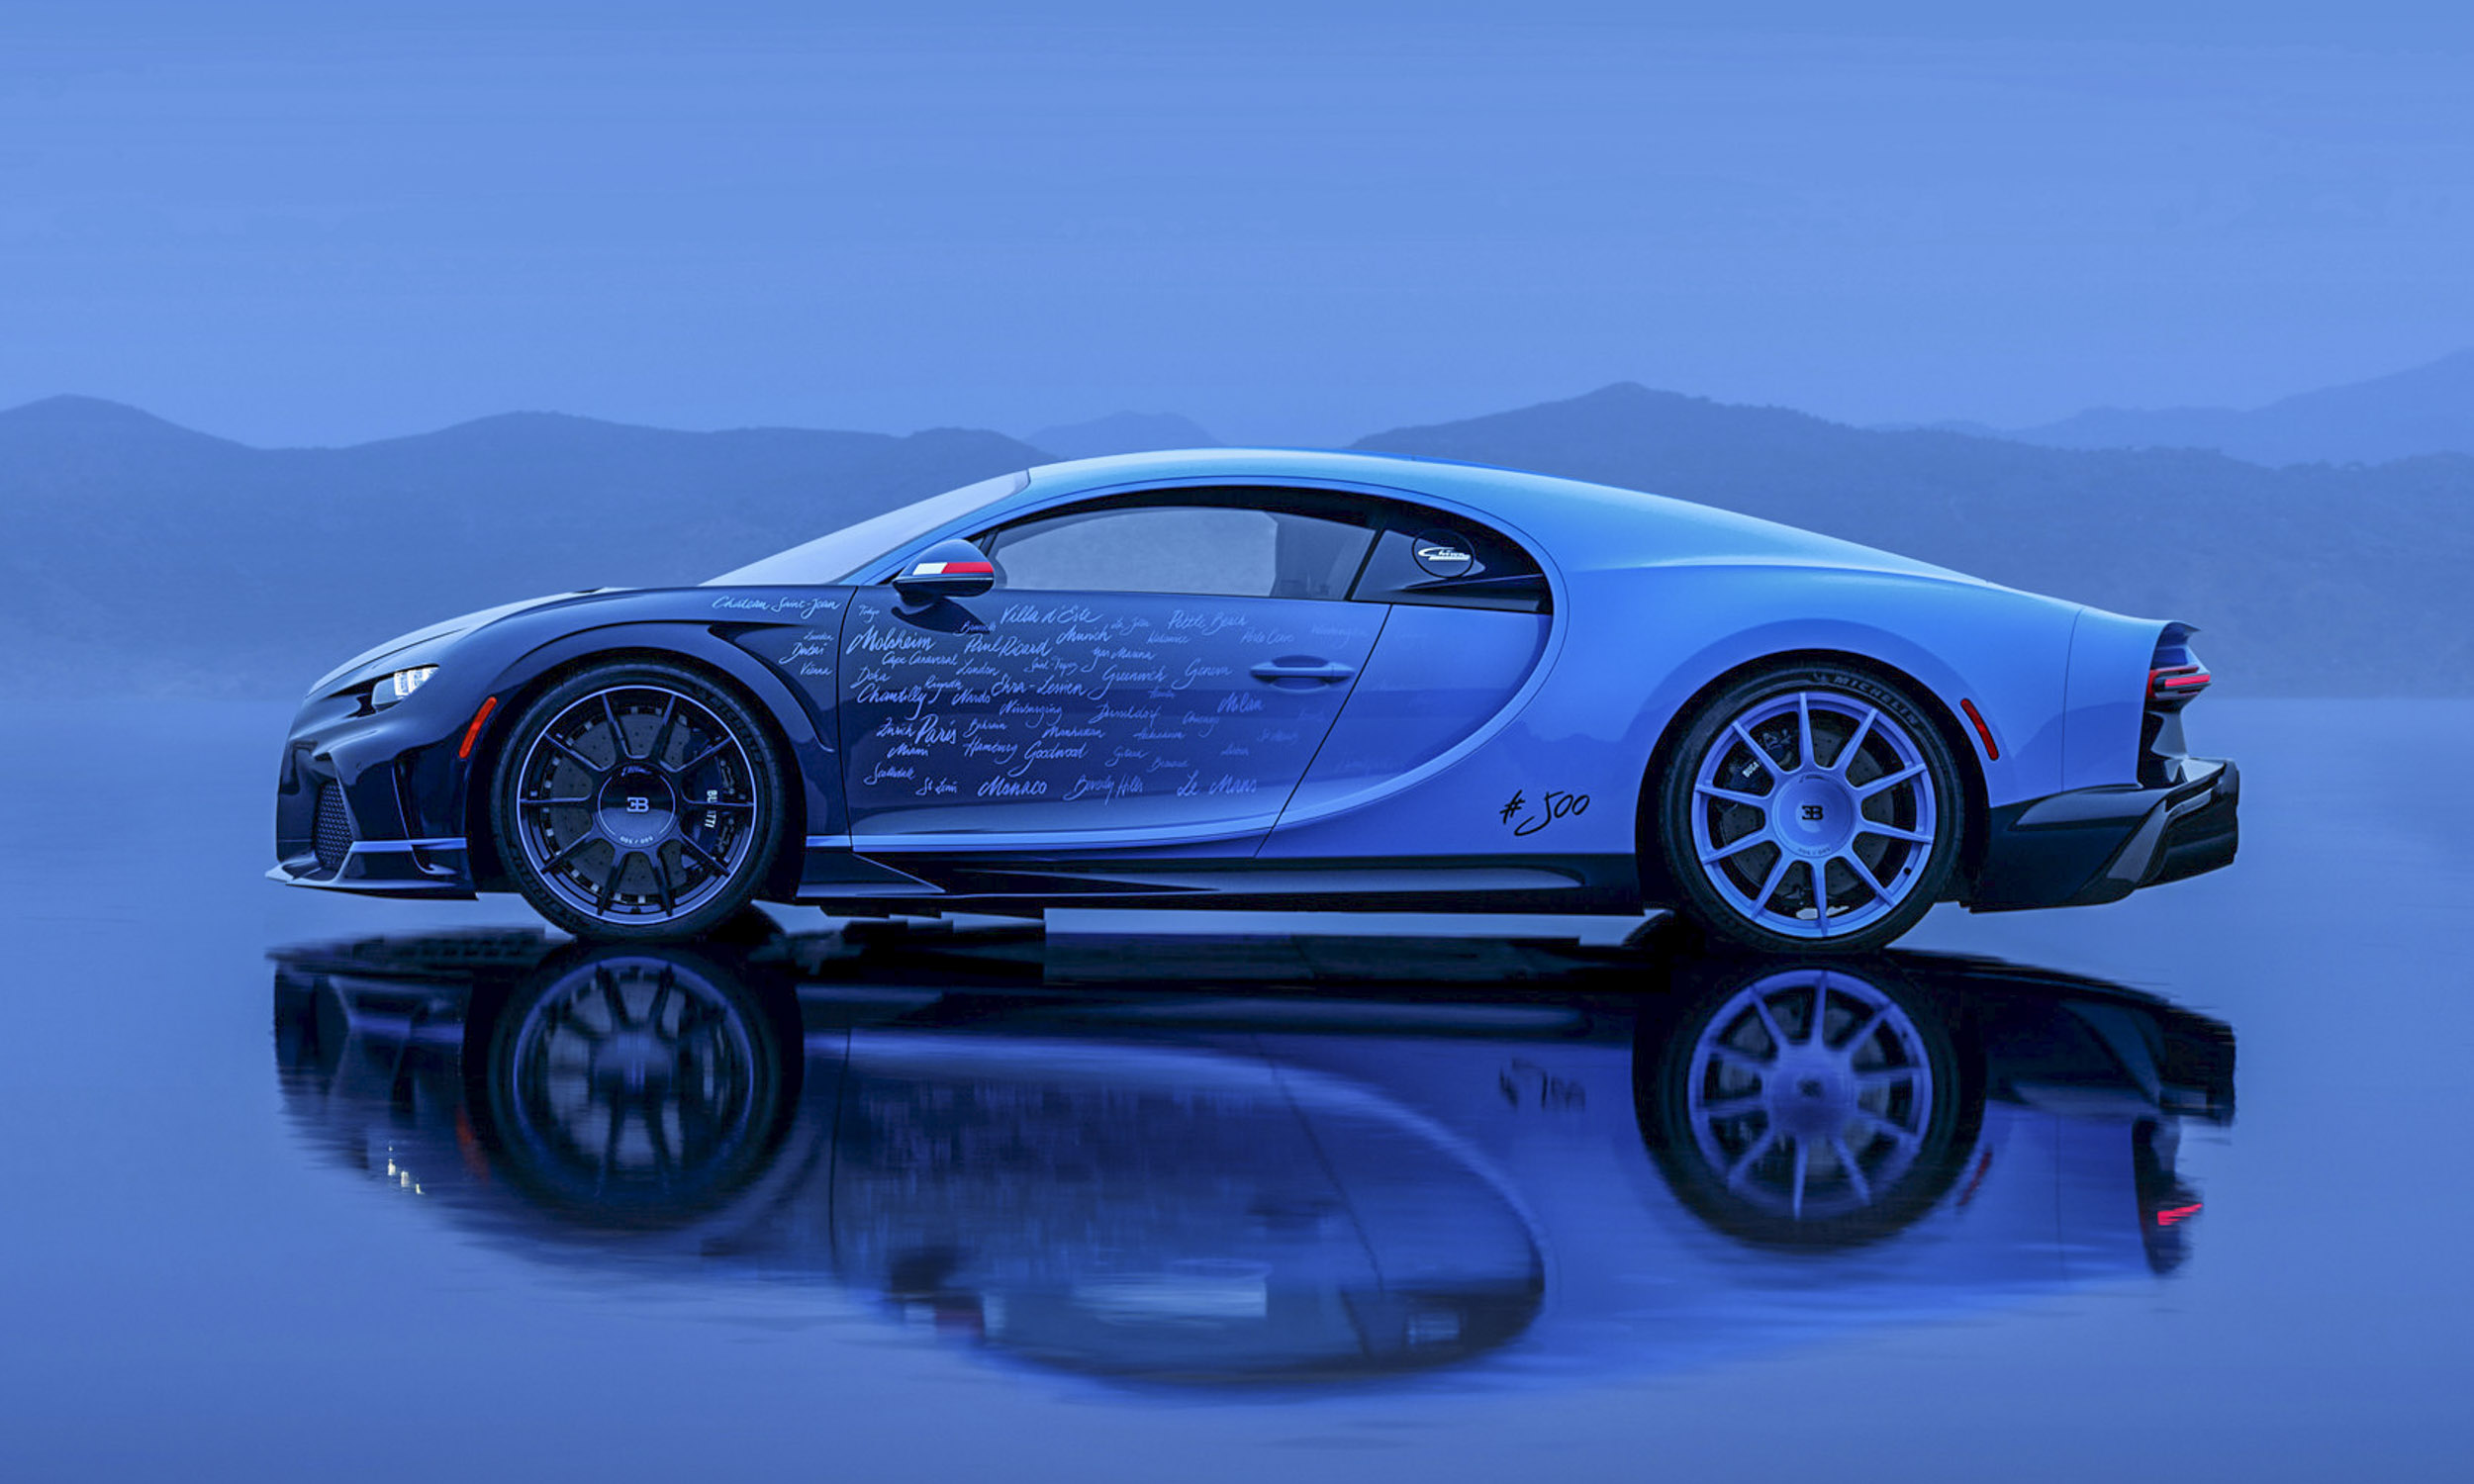 <p>          The Chiron L’Ultime features the same Atlantic Blue and French Racing Blue colors that adorned the first Chiron when it debuted in Geneva, but designers provided a new take on the color scheme. The colors now blend seamlessly together, fading from dark in front to light in the rear. All the places that were significant in the life of the Chiron are hand-scripted on the side of the vehicle. The #500 written ahead of the rear wheel completes the look.         </p>